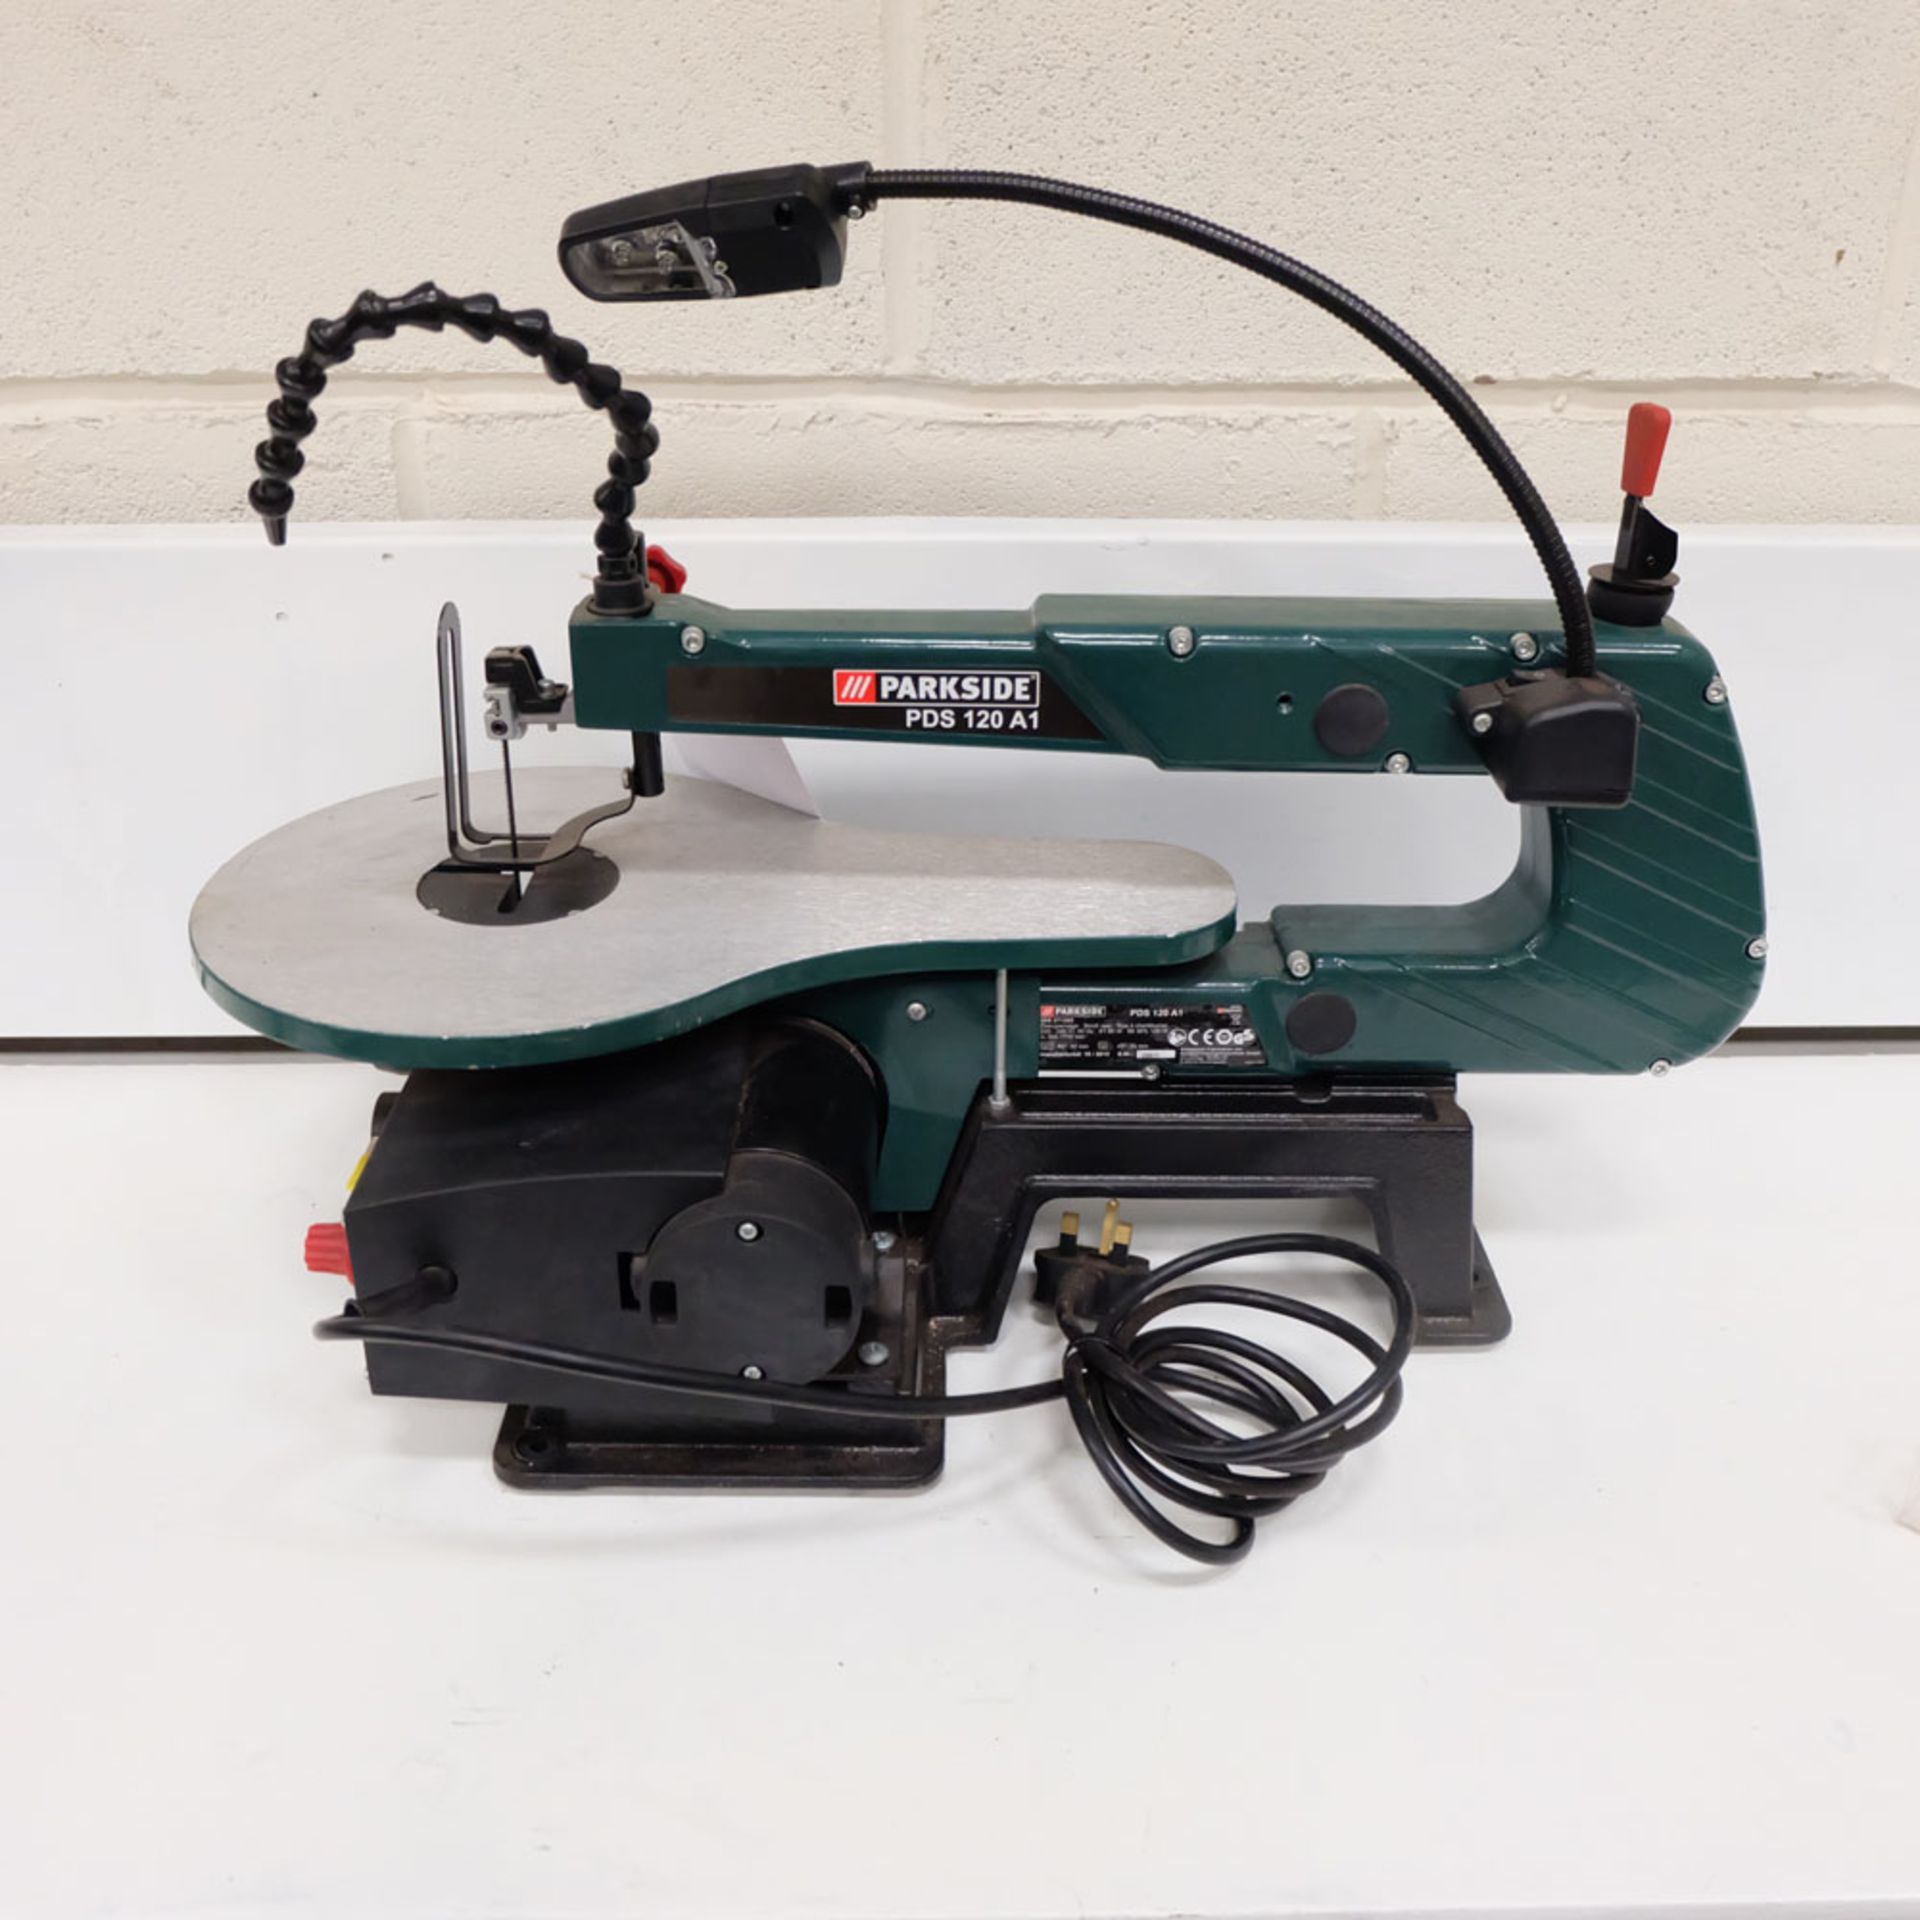 PARKSIDE Model PDS 120 A1 Bench Top Scroll Saw with Light and Spare Blades. - Image 3 of 5